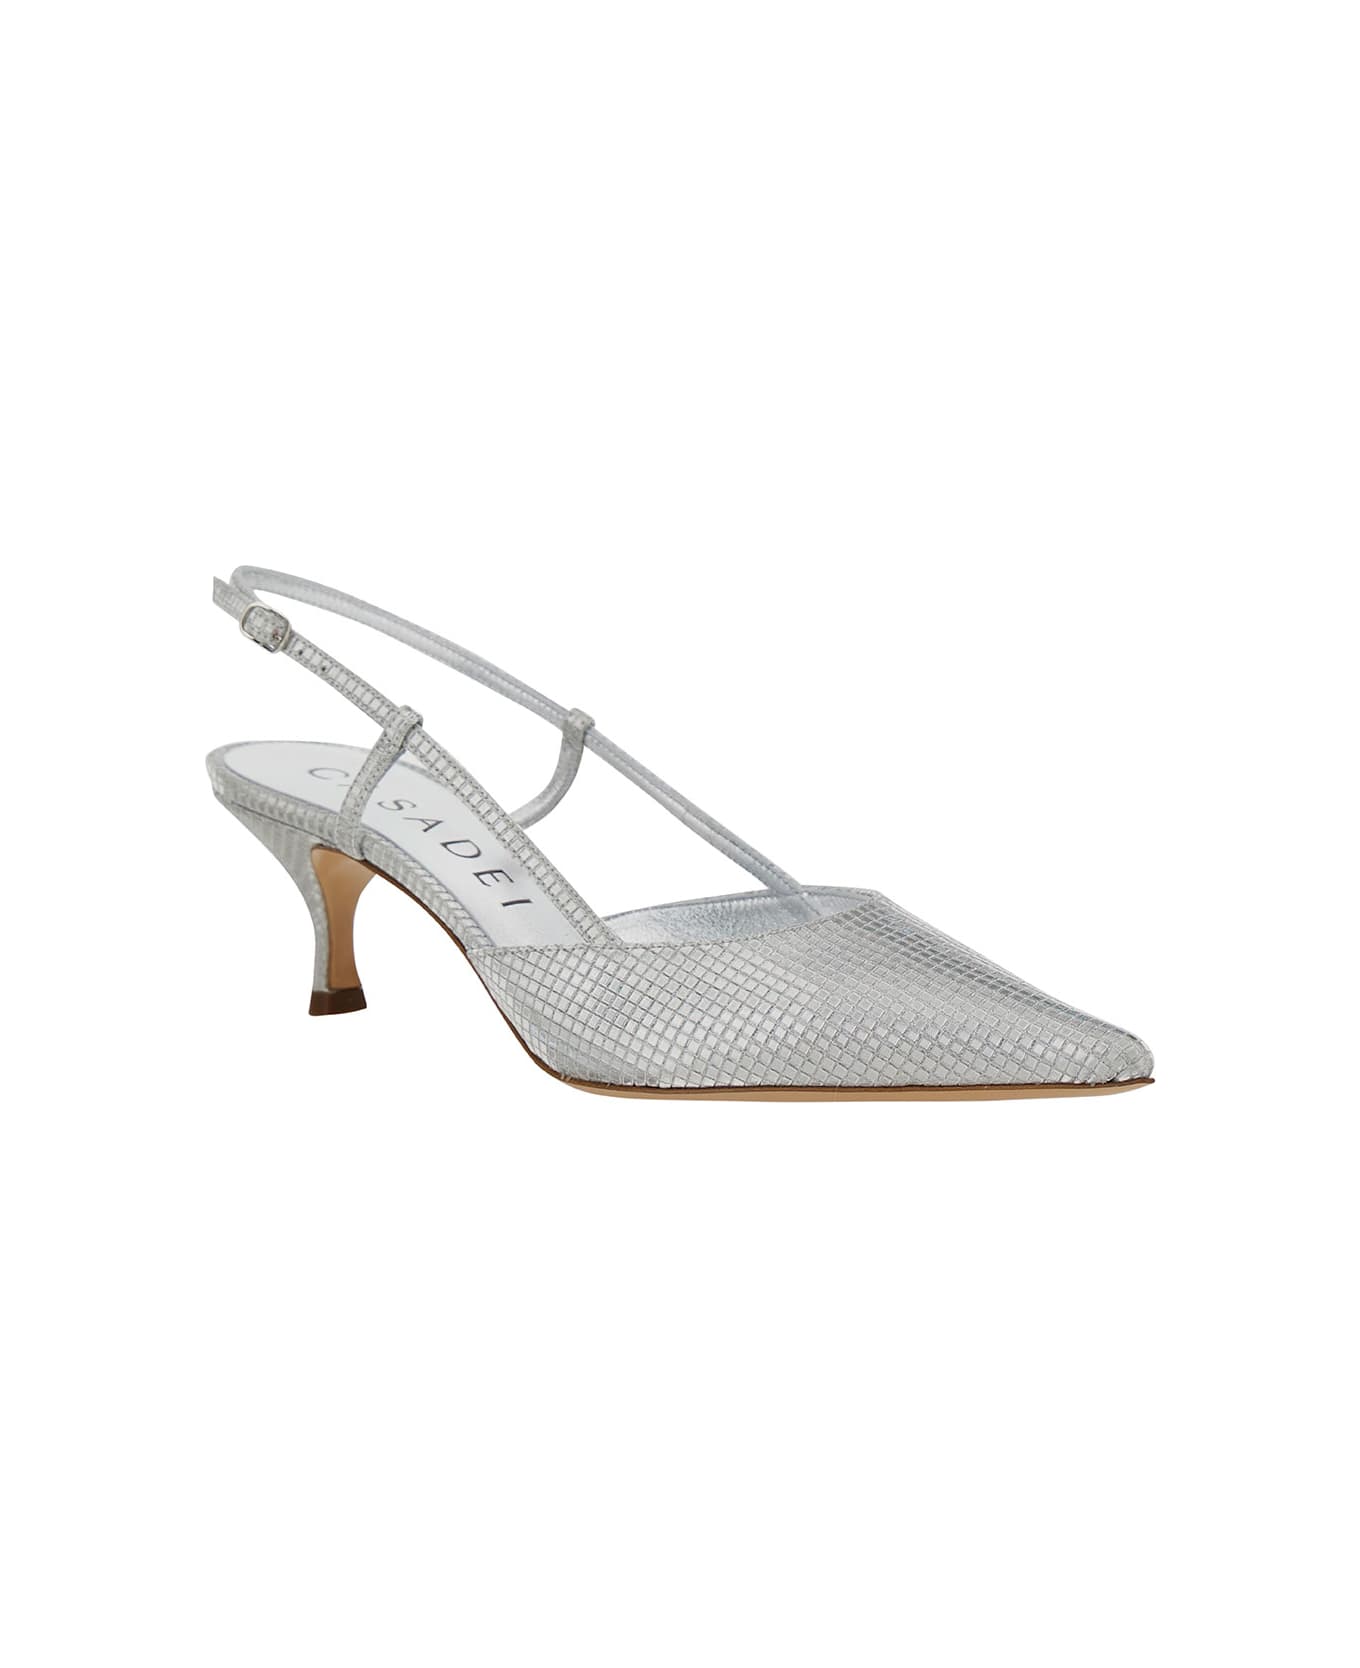 Casadei Silver Slingback Pumps With Kitten Heel In Reflective Metallic Fabric Woman - SILVER ハイヒール